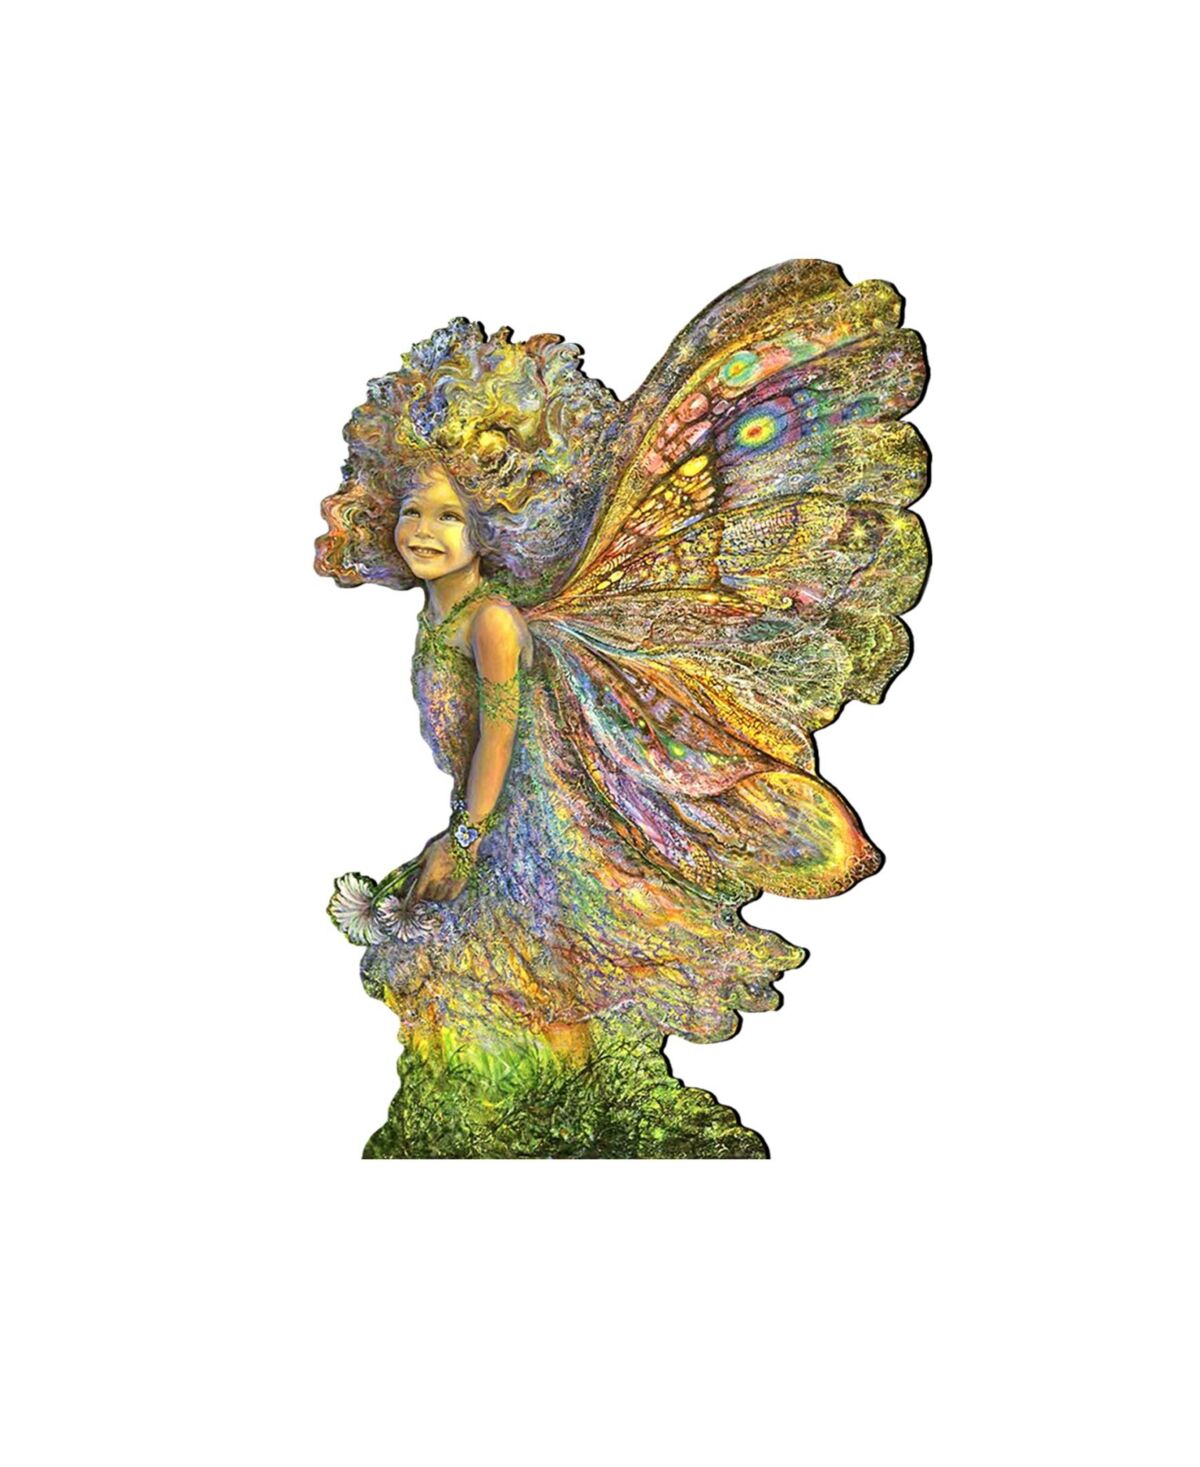 Designocracy Fairy Wall Decor and Over The Door Wooden Hanger by Josephine Wall - Multi